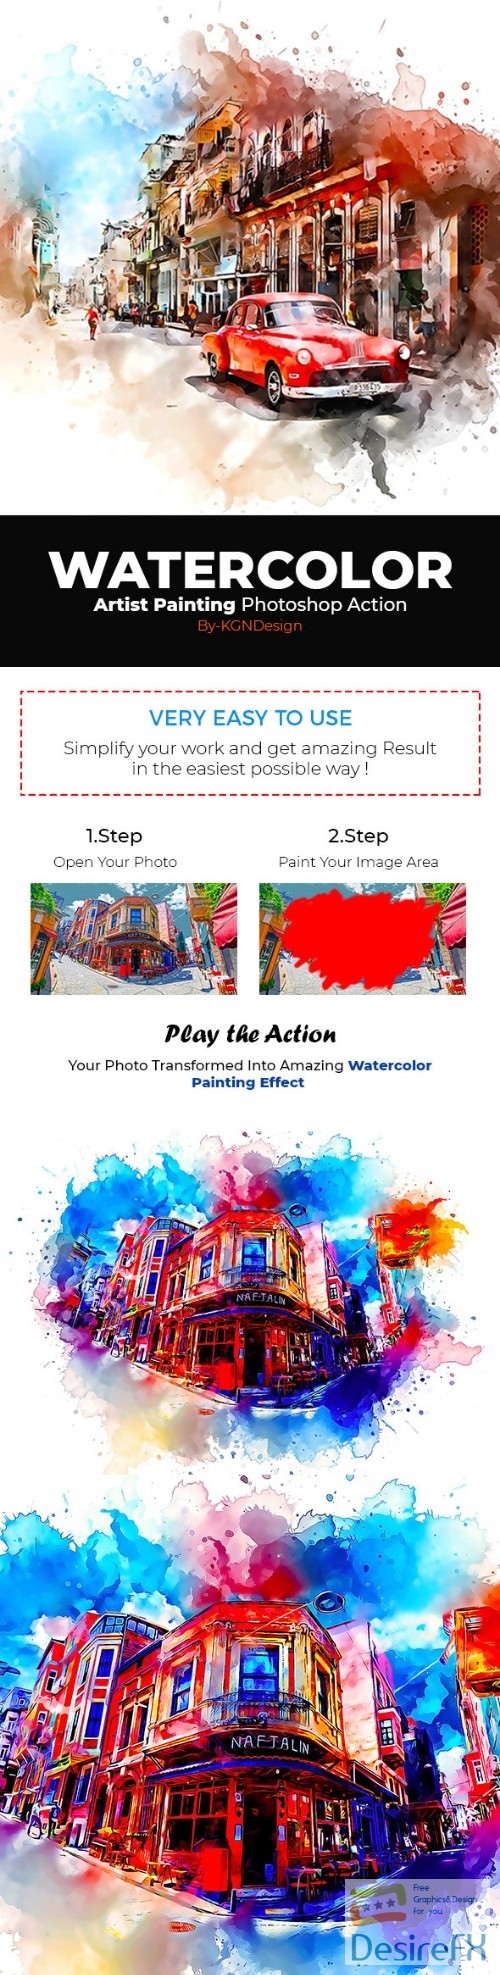 Watercolor Artist Painting Photoshop Action 22294640